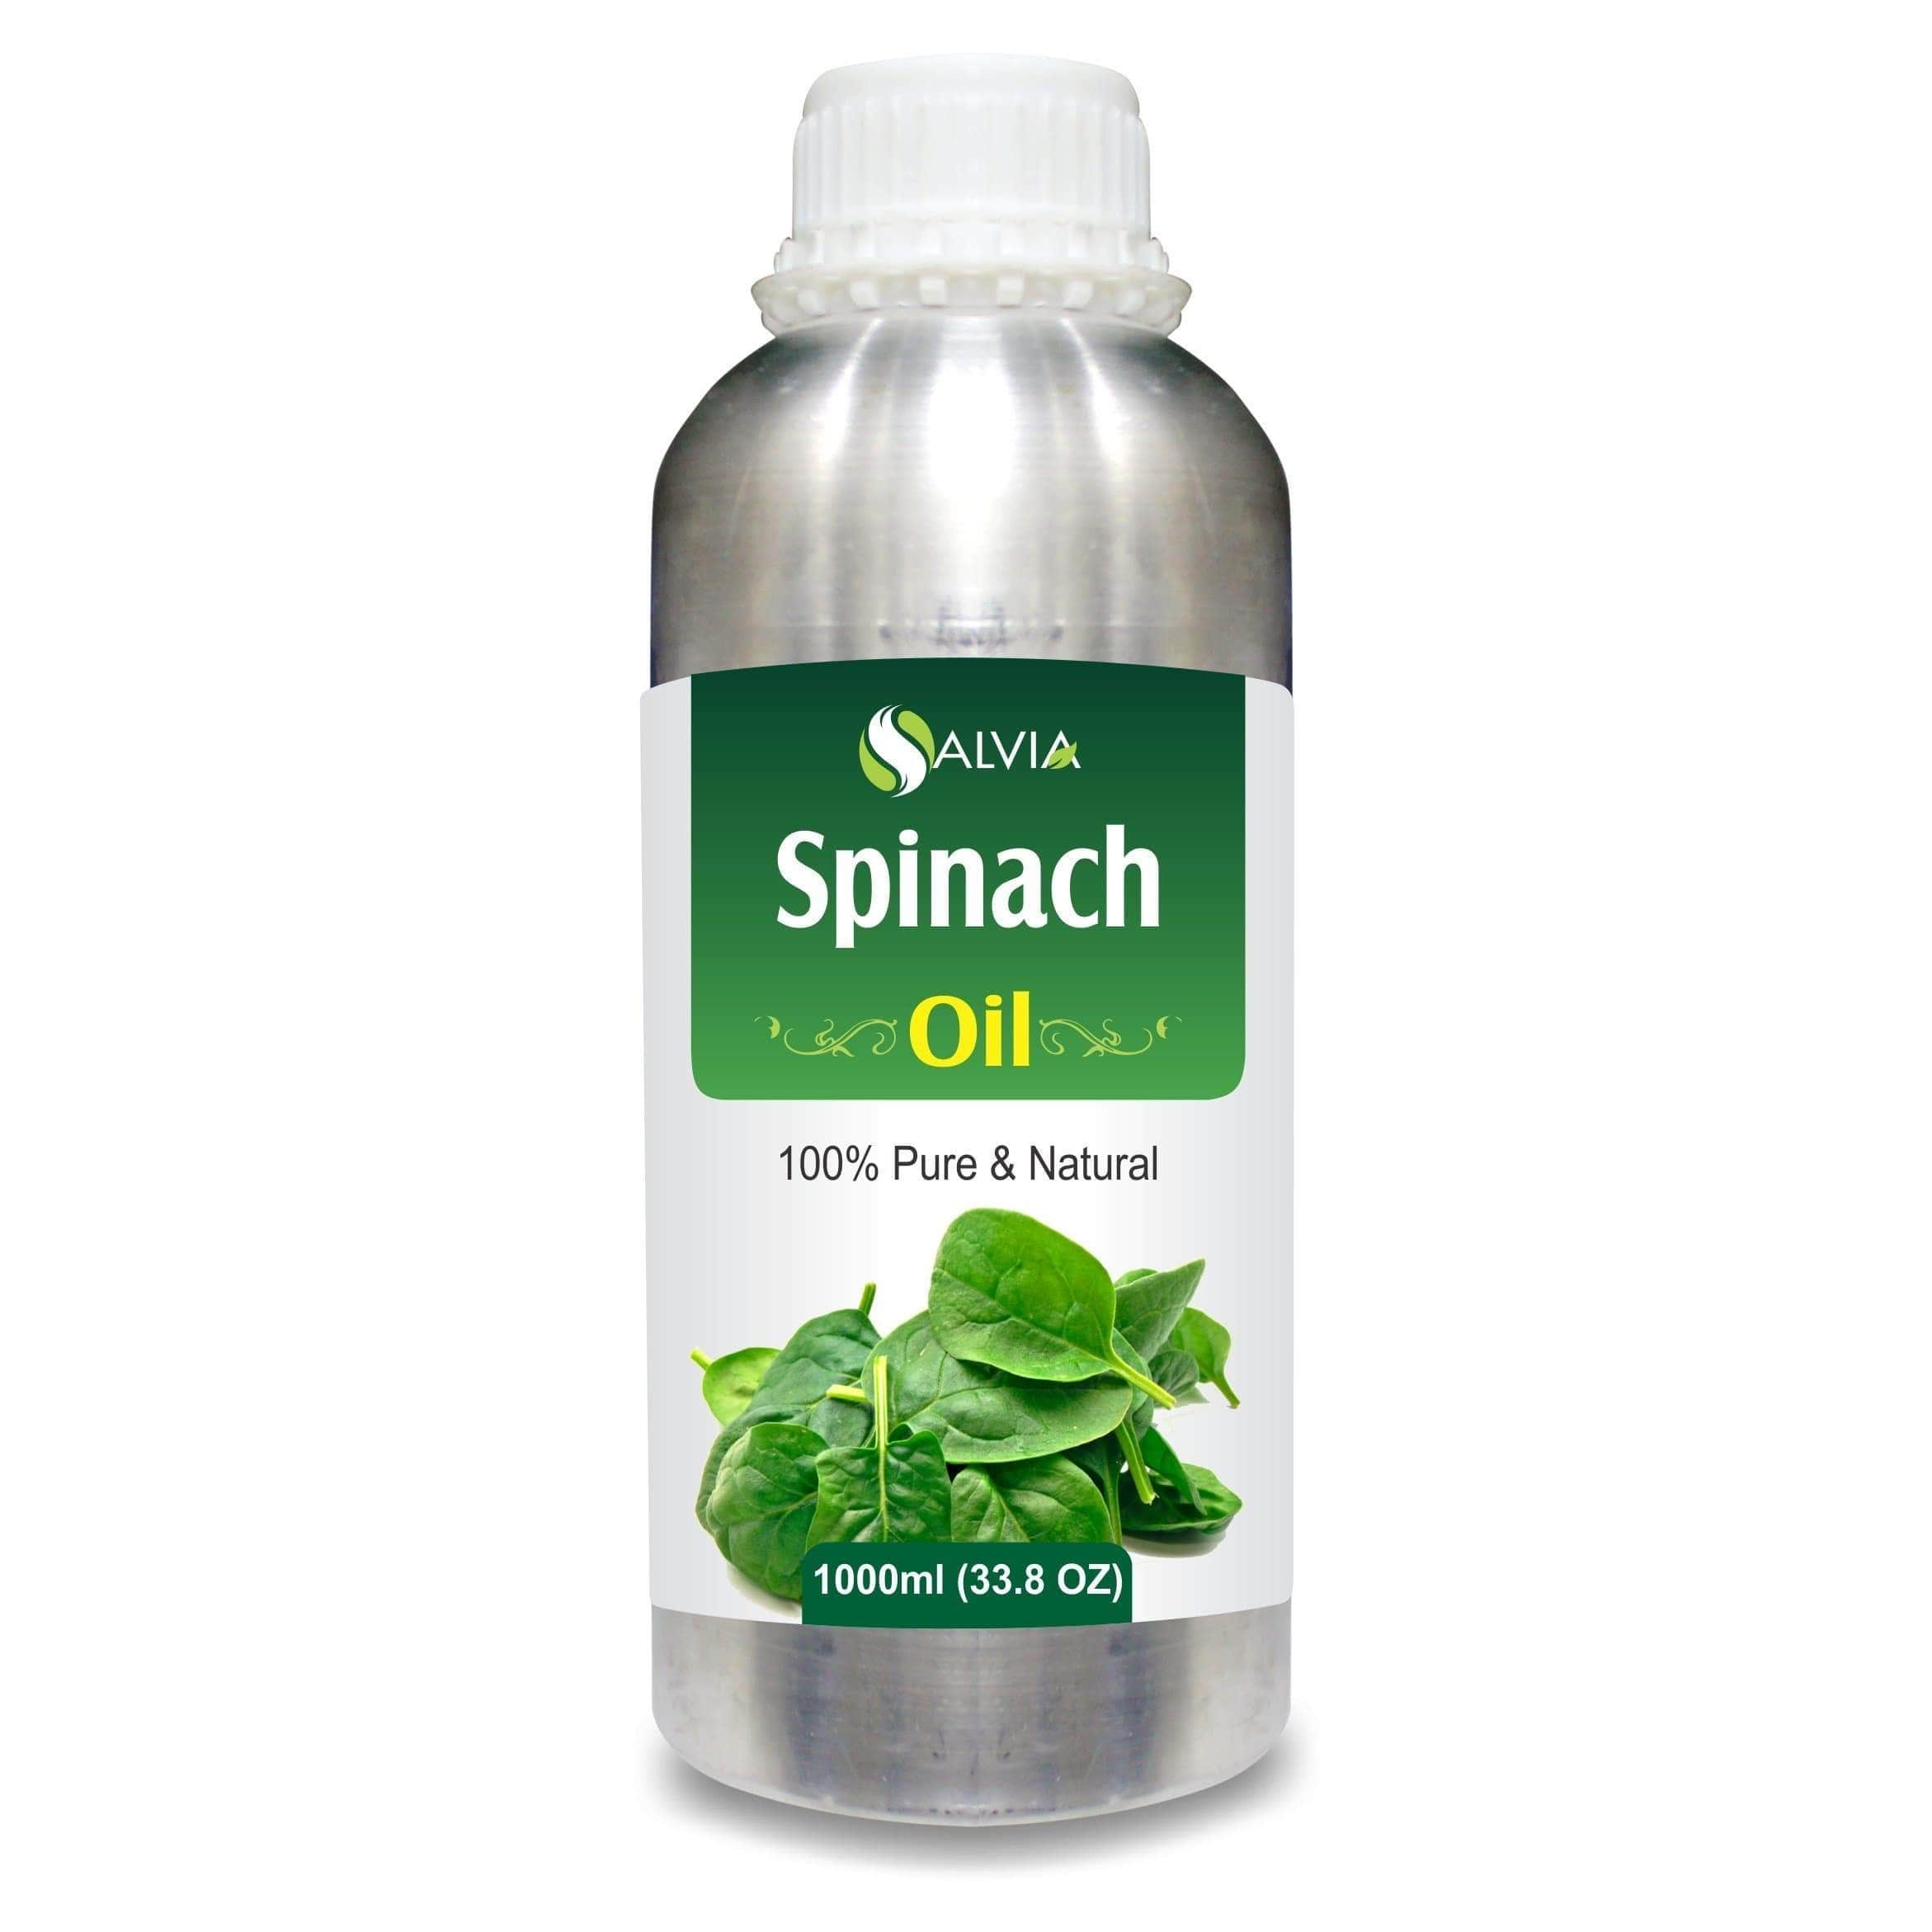 spinach oil benefits 